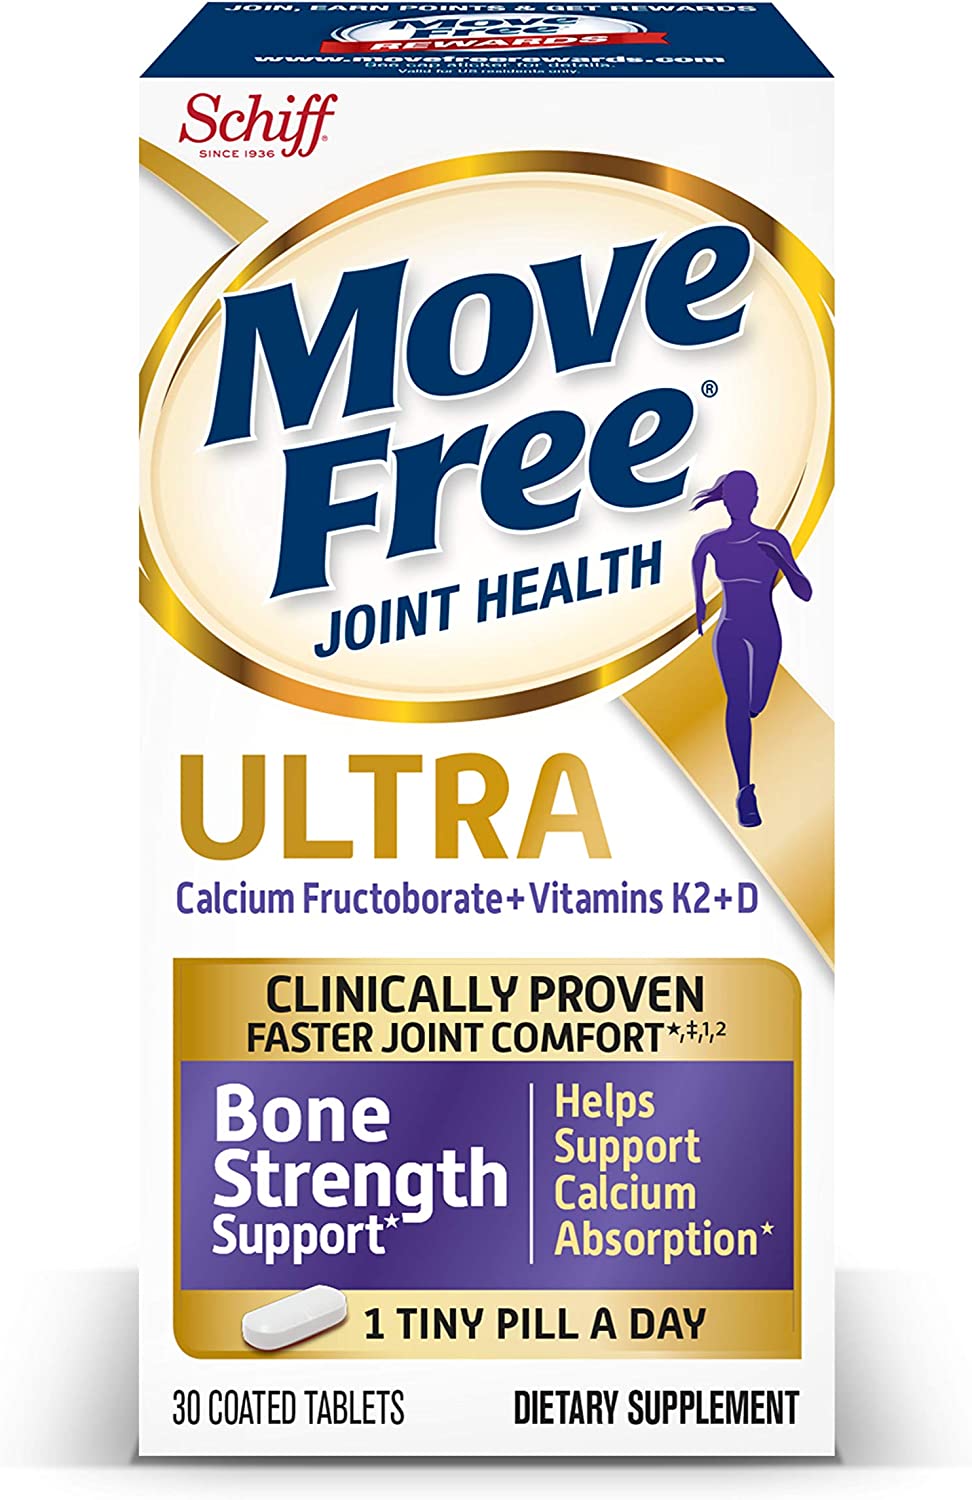 Review of Move Free Vitamins D & K2 + Calcium Fructoborate Ultra Bone Strength Support* Tablets,